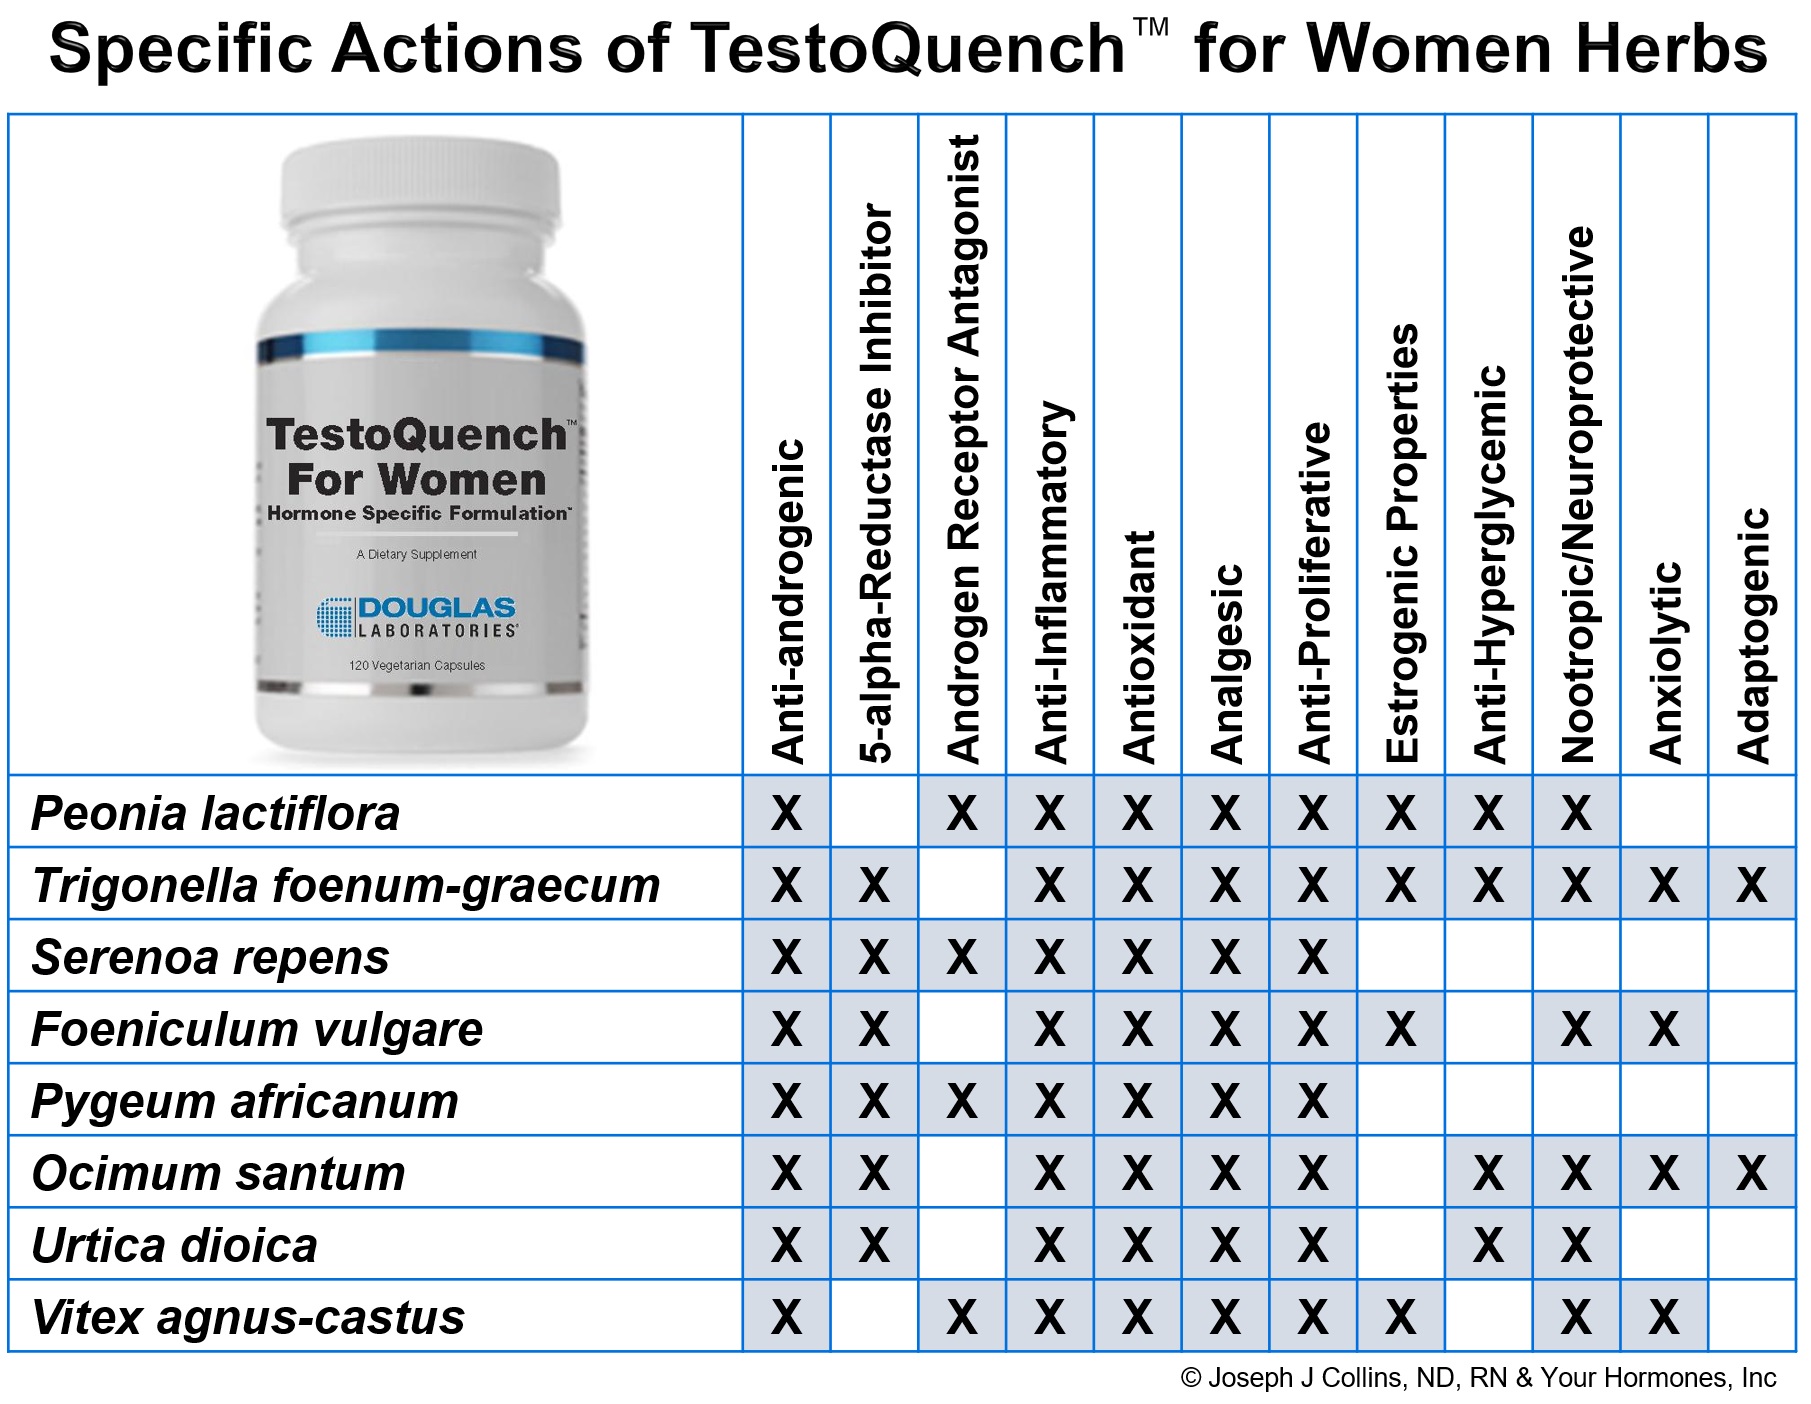 Specific Actions of herbs in TestoQuench™ for Women 